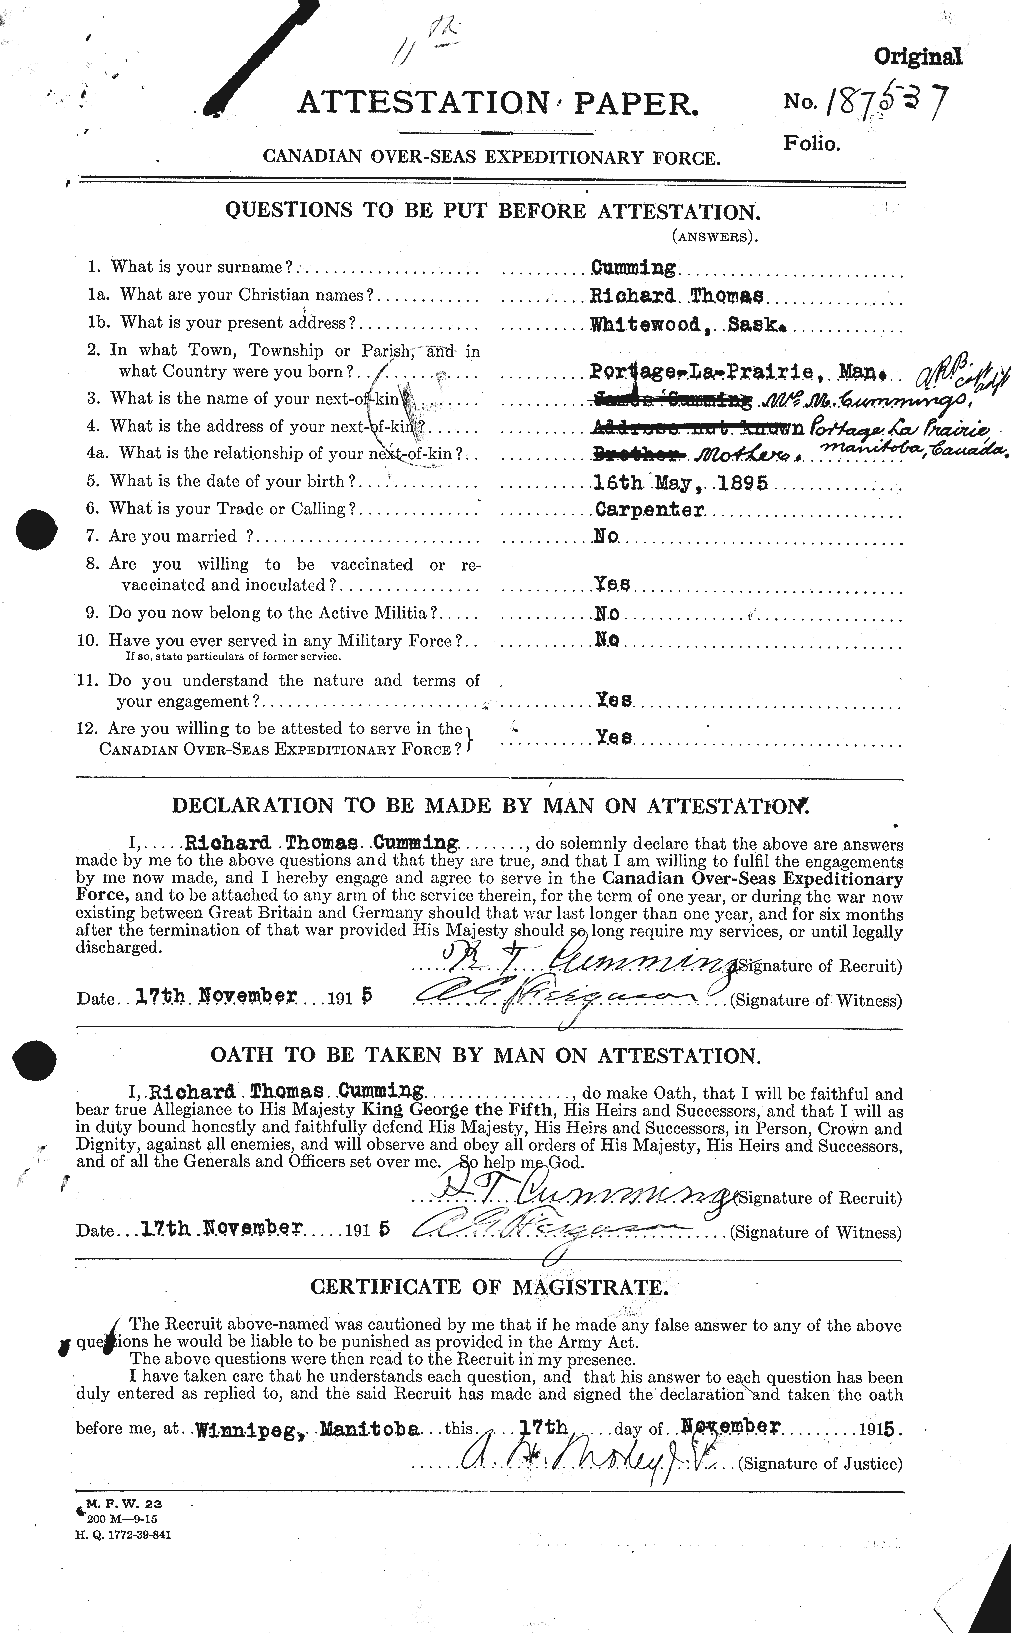 Personnel Records of the First World War - CEF 070945a